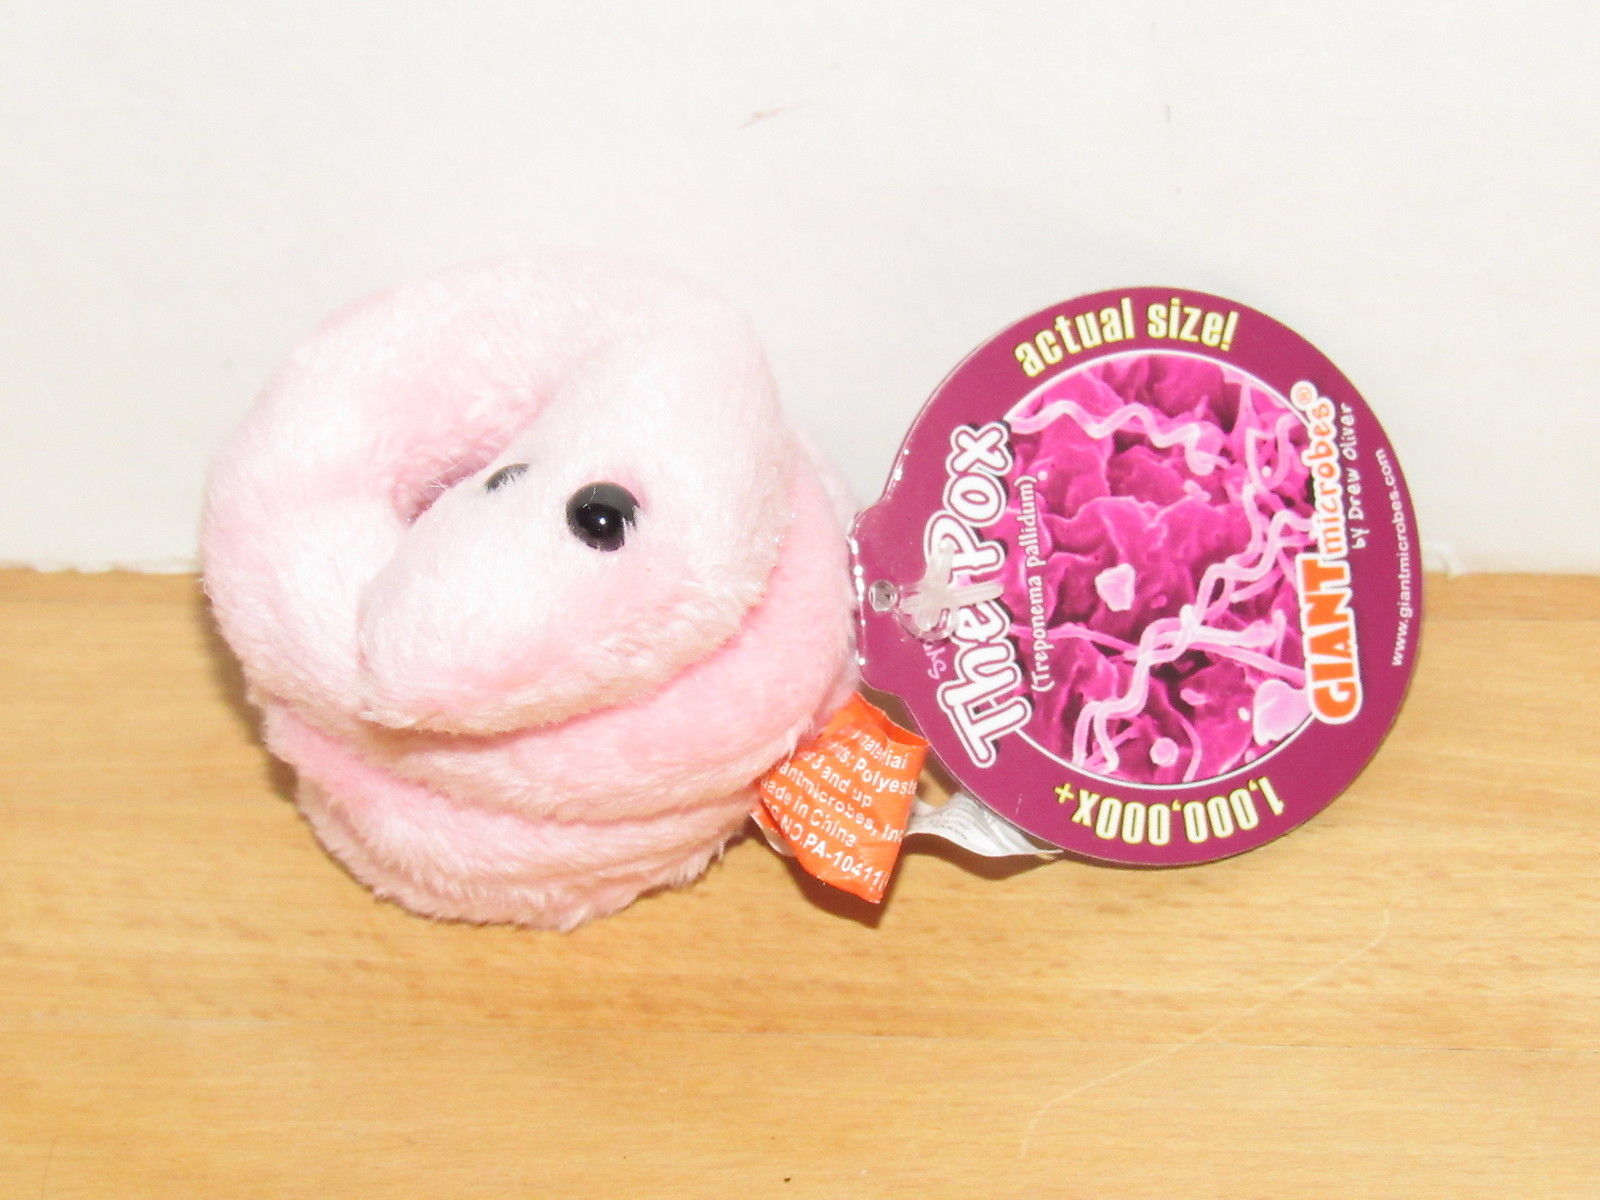 giant microbes by drew oliver